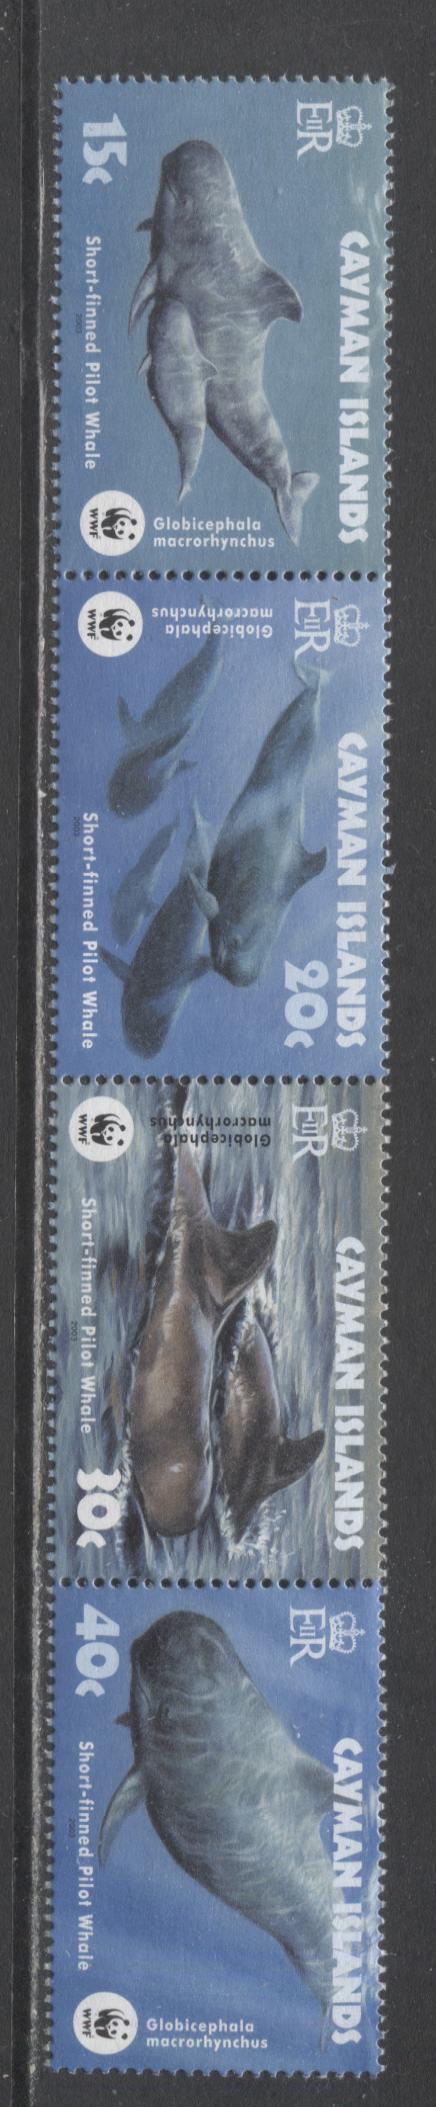 Lot 155 Cayman Islands SC#902-905 2003 WWF Issue, A VFNH Strip Of 4, Click on Listing to See ALL Pictures, 2017 Scott Cat. $7